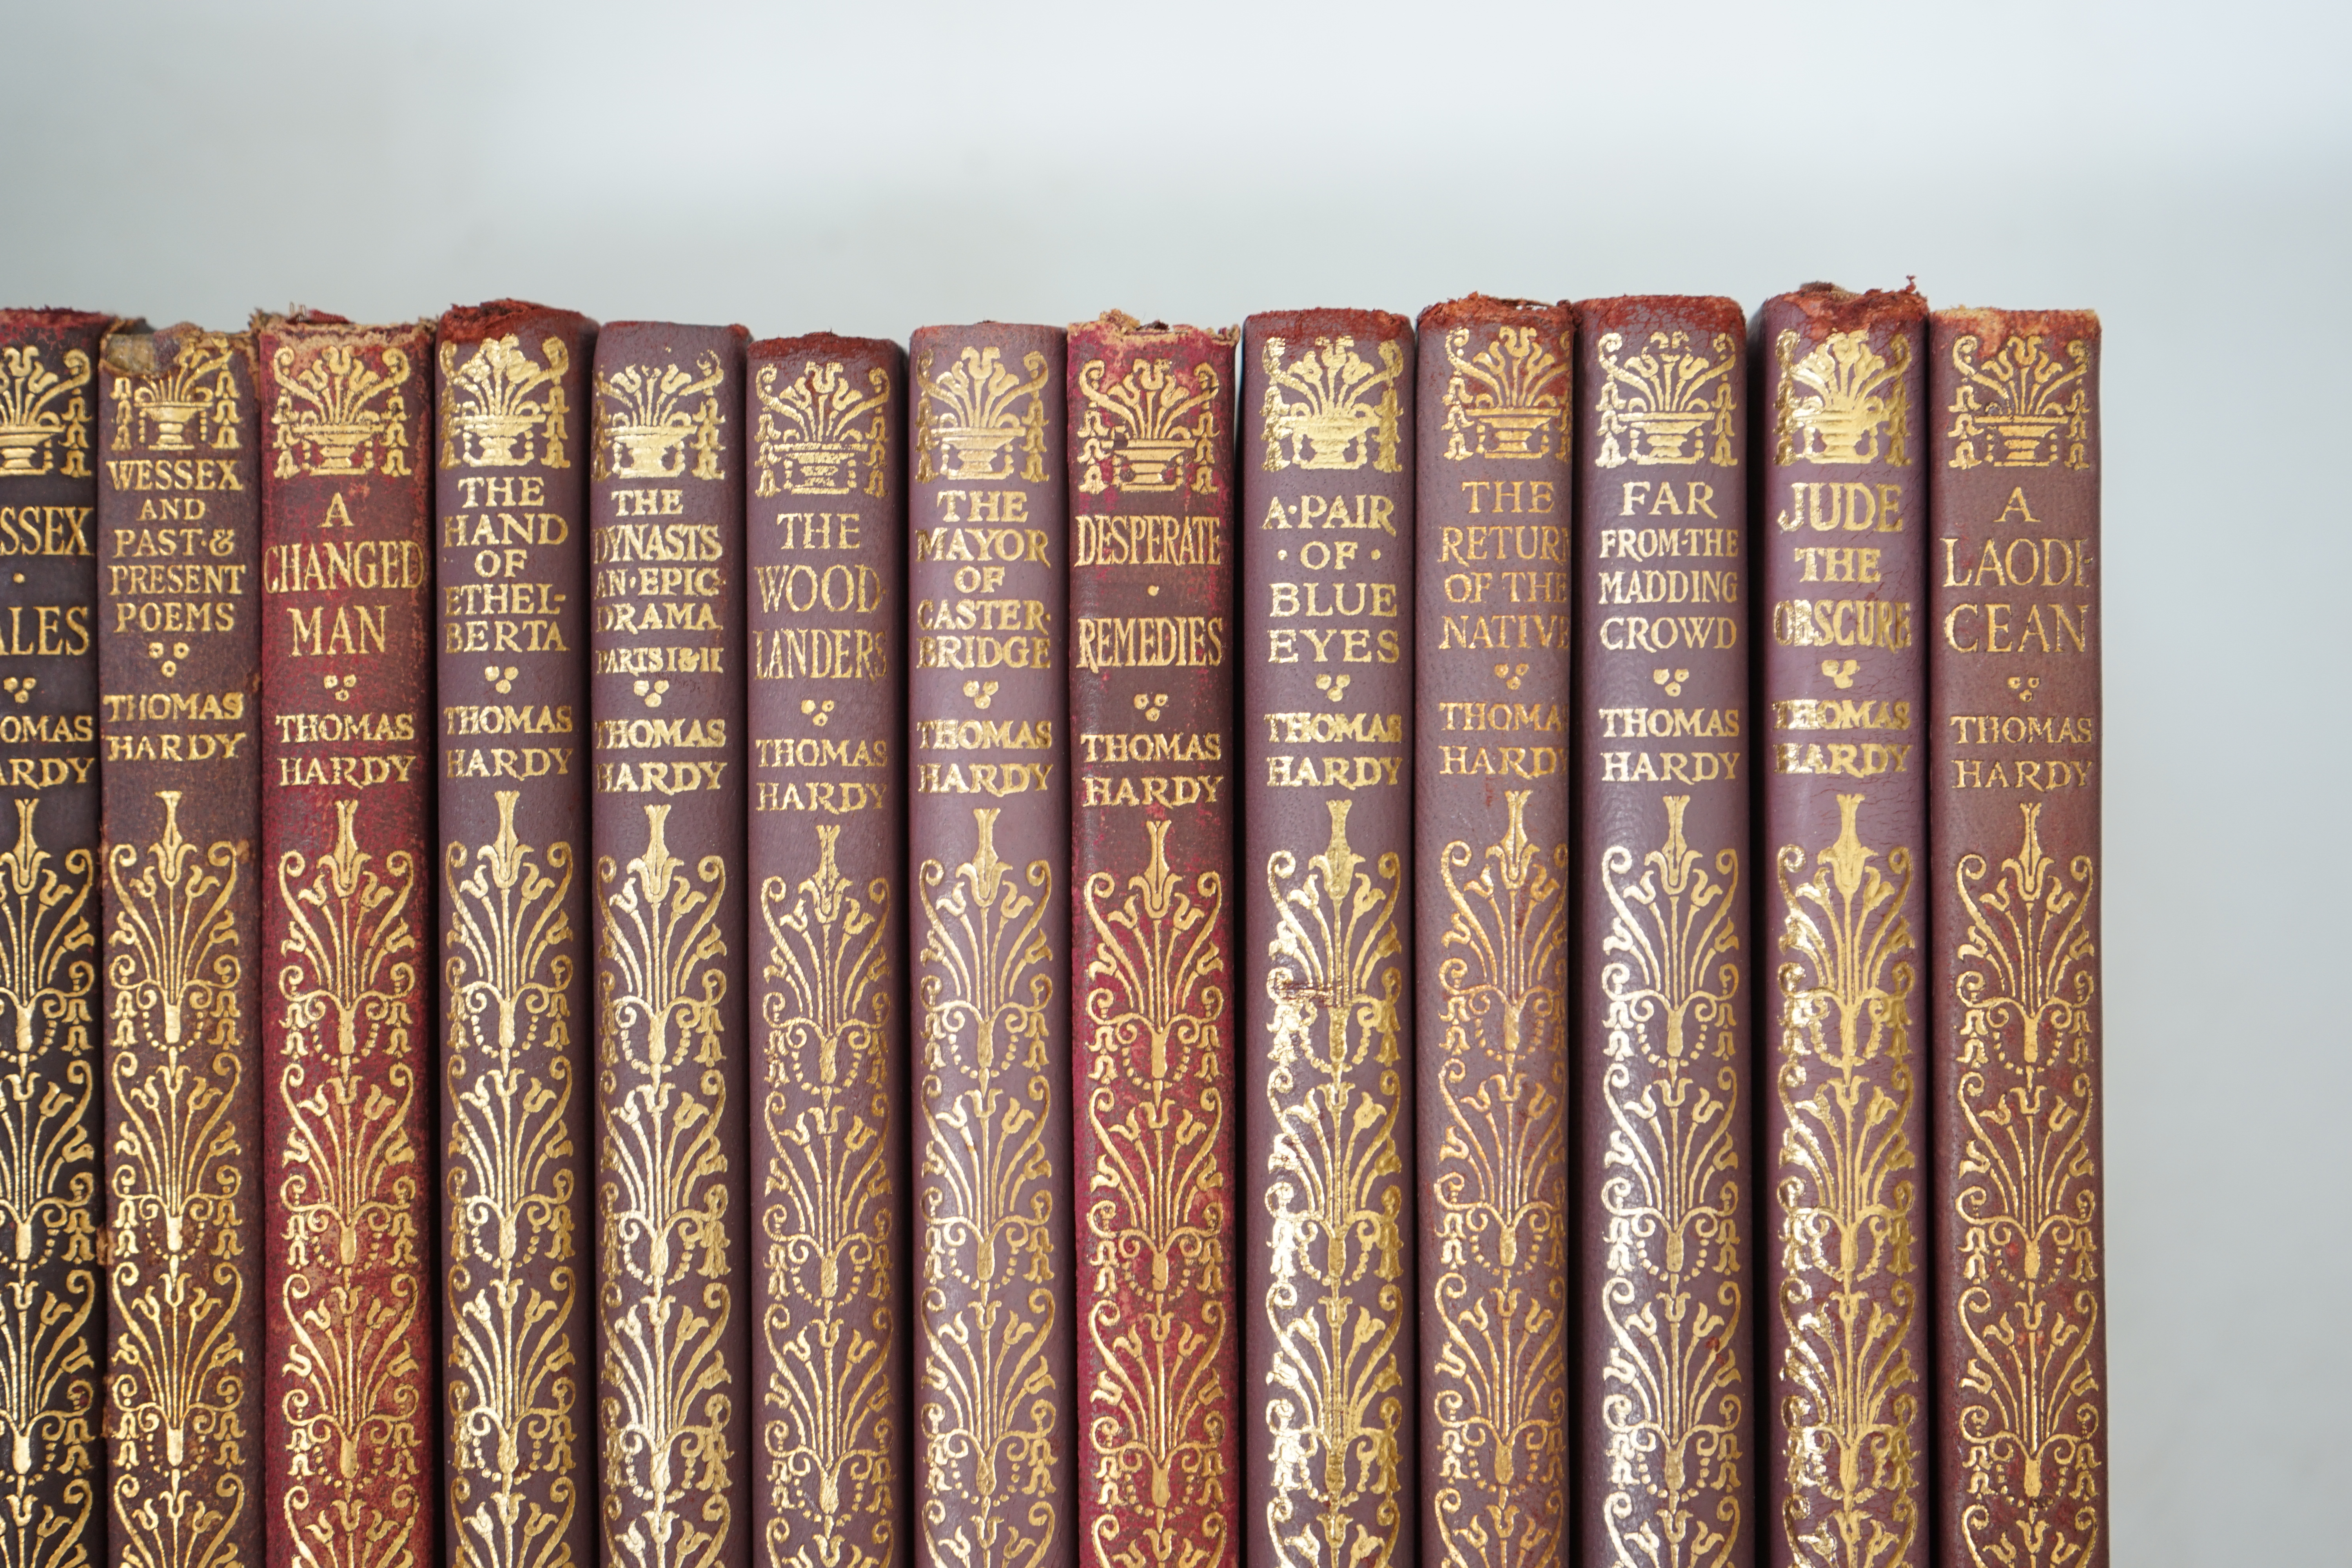 Hardy, Thomas - The Works, a harlequin pocket set edition of 17 vols, 12mo, in red leather gilt bindings, Macmillan and Co., London, 1925- 1941